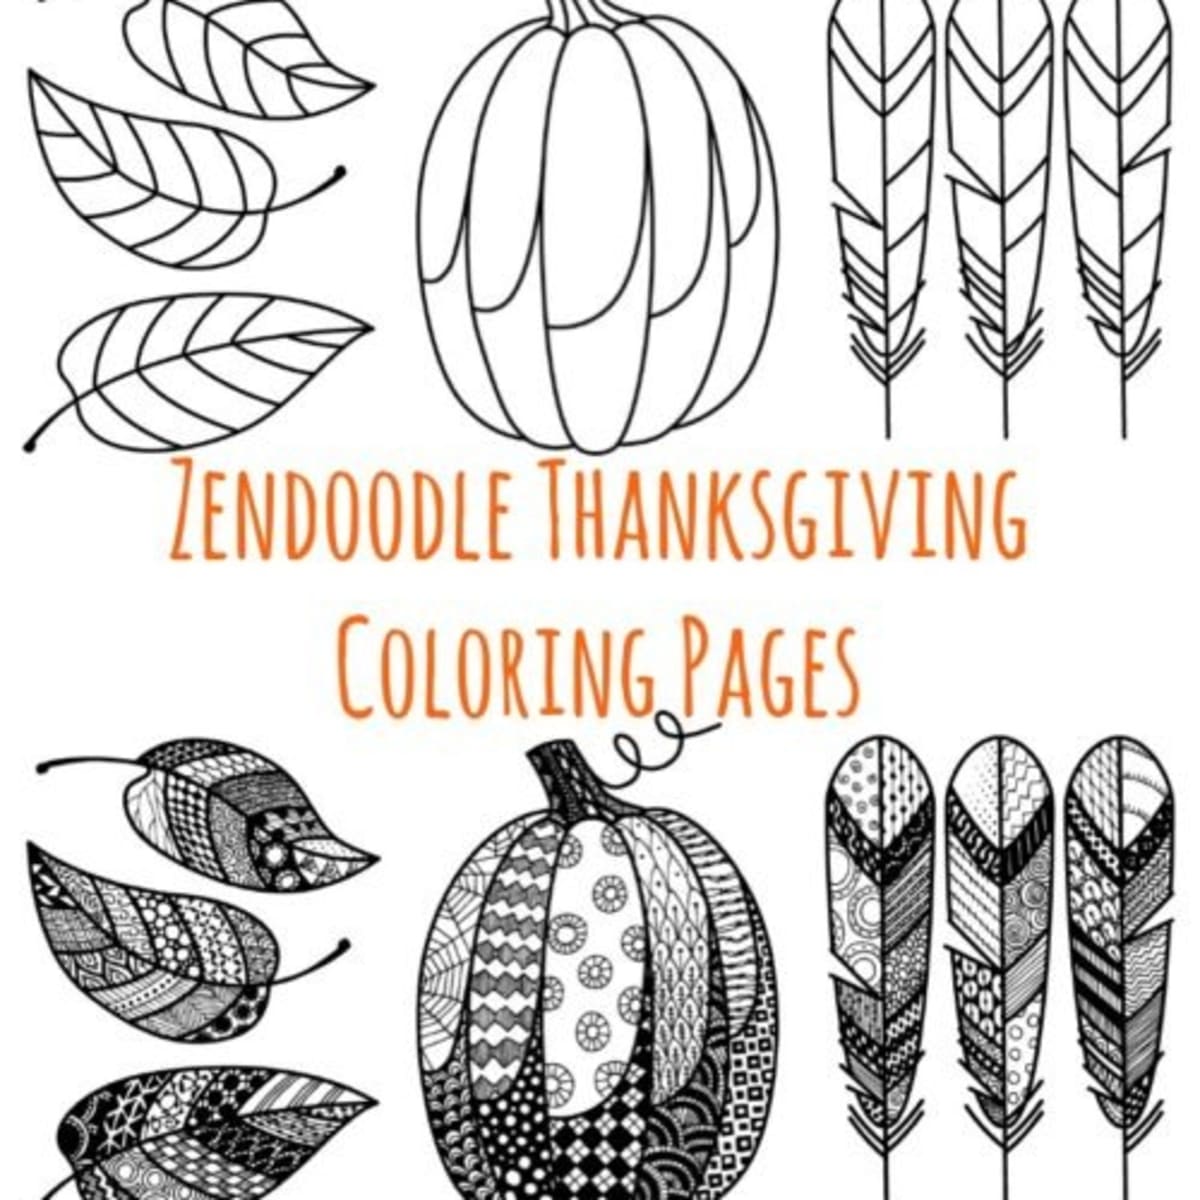 Zentangle Thanksgiving Coloring Pages - Coloring Page Of Turkey For